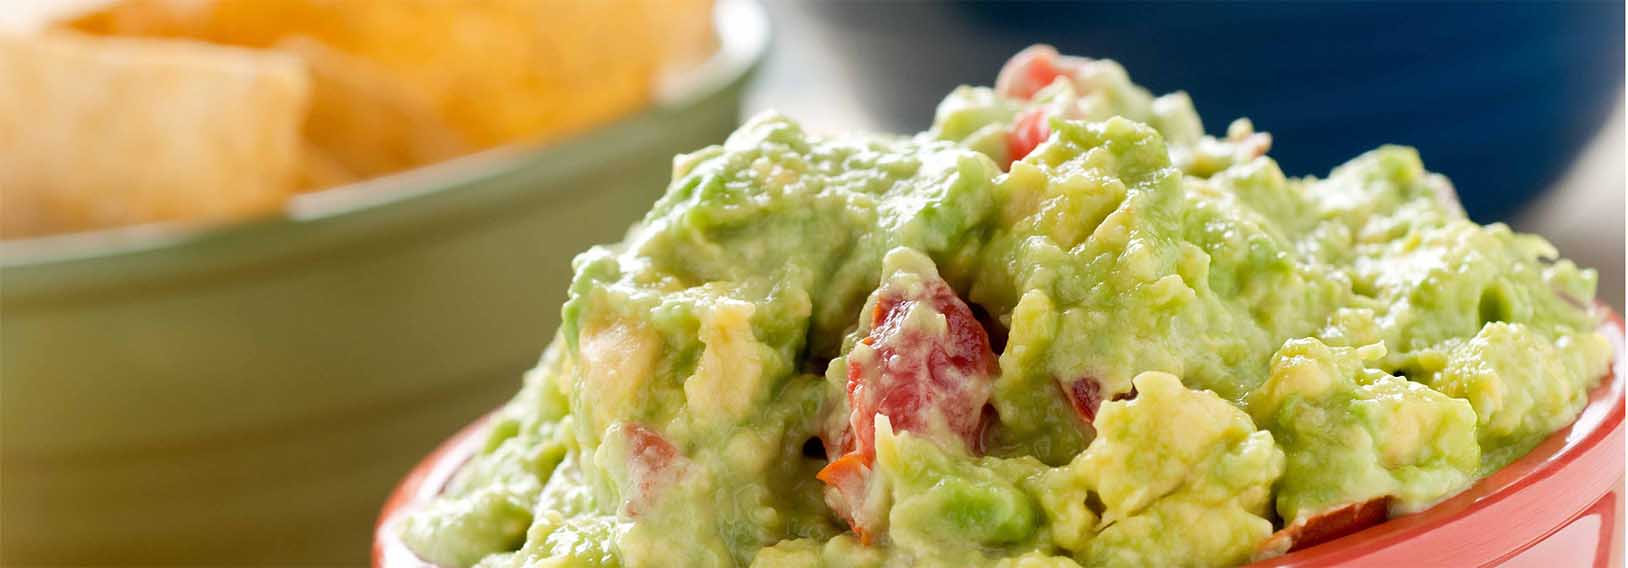 Guacamole dip in a bowl with chips 